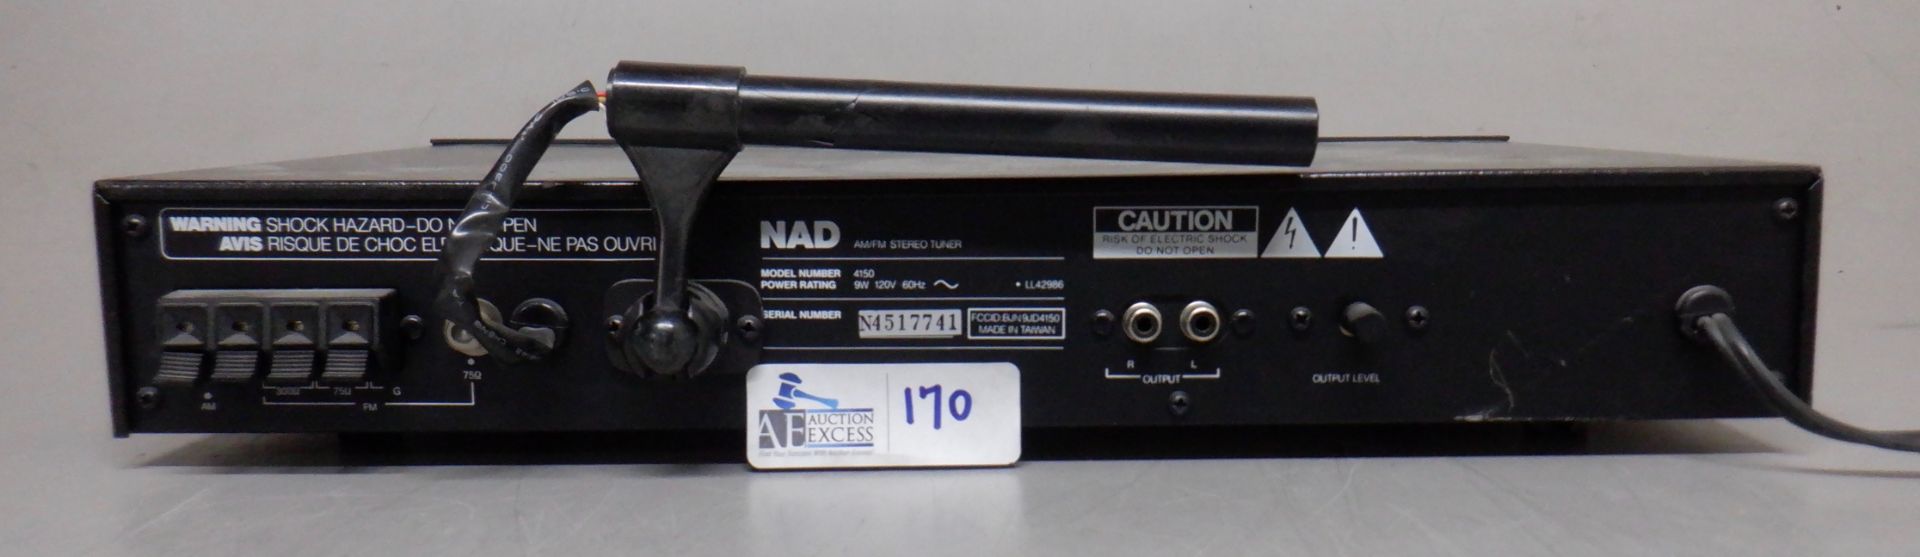 NAD 4150 STEREO TUNER - Image 2 of 2